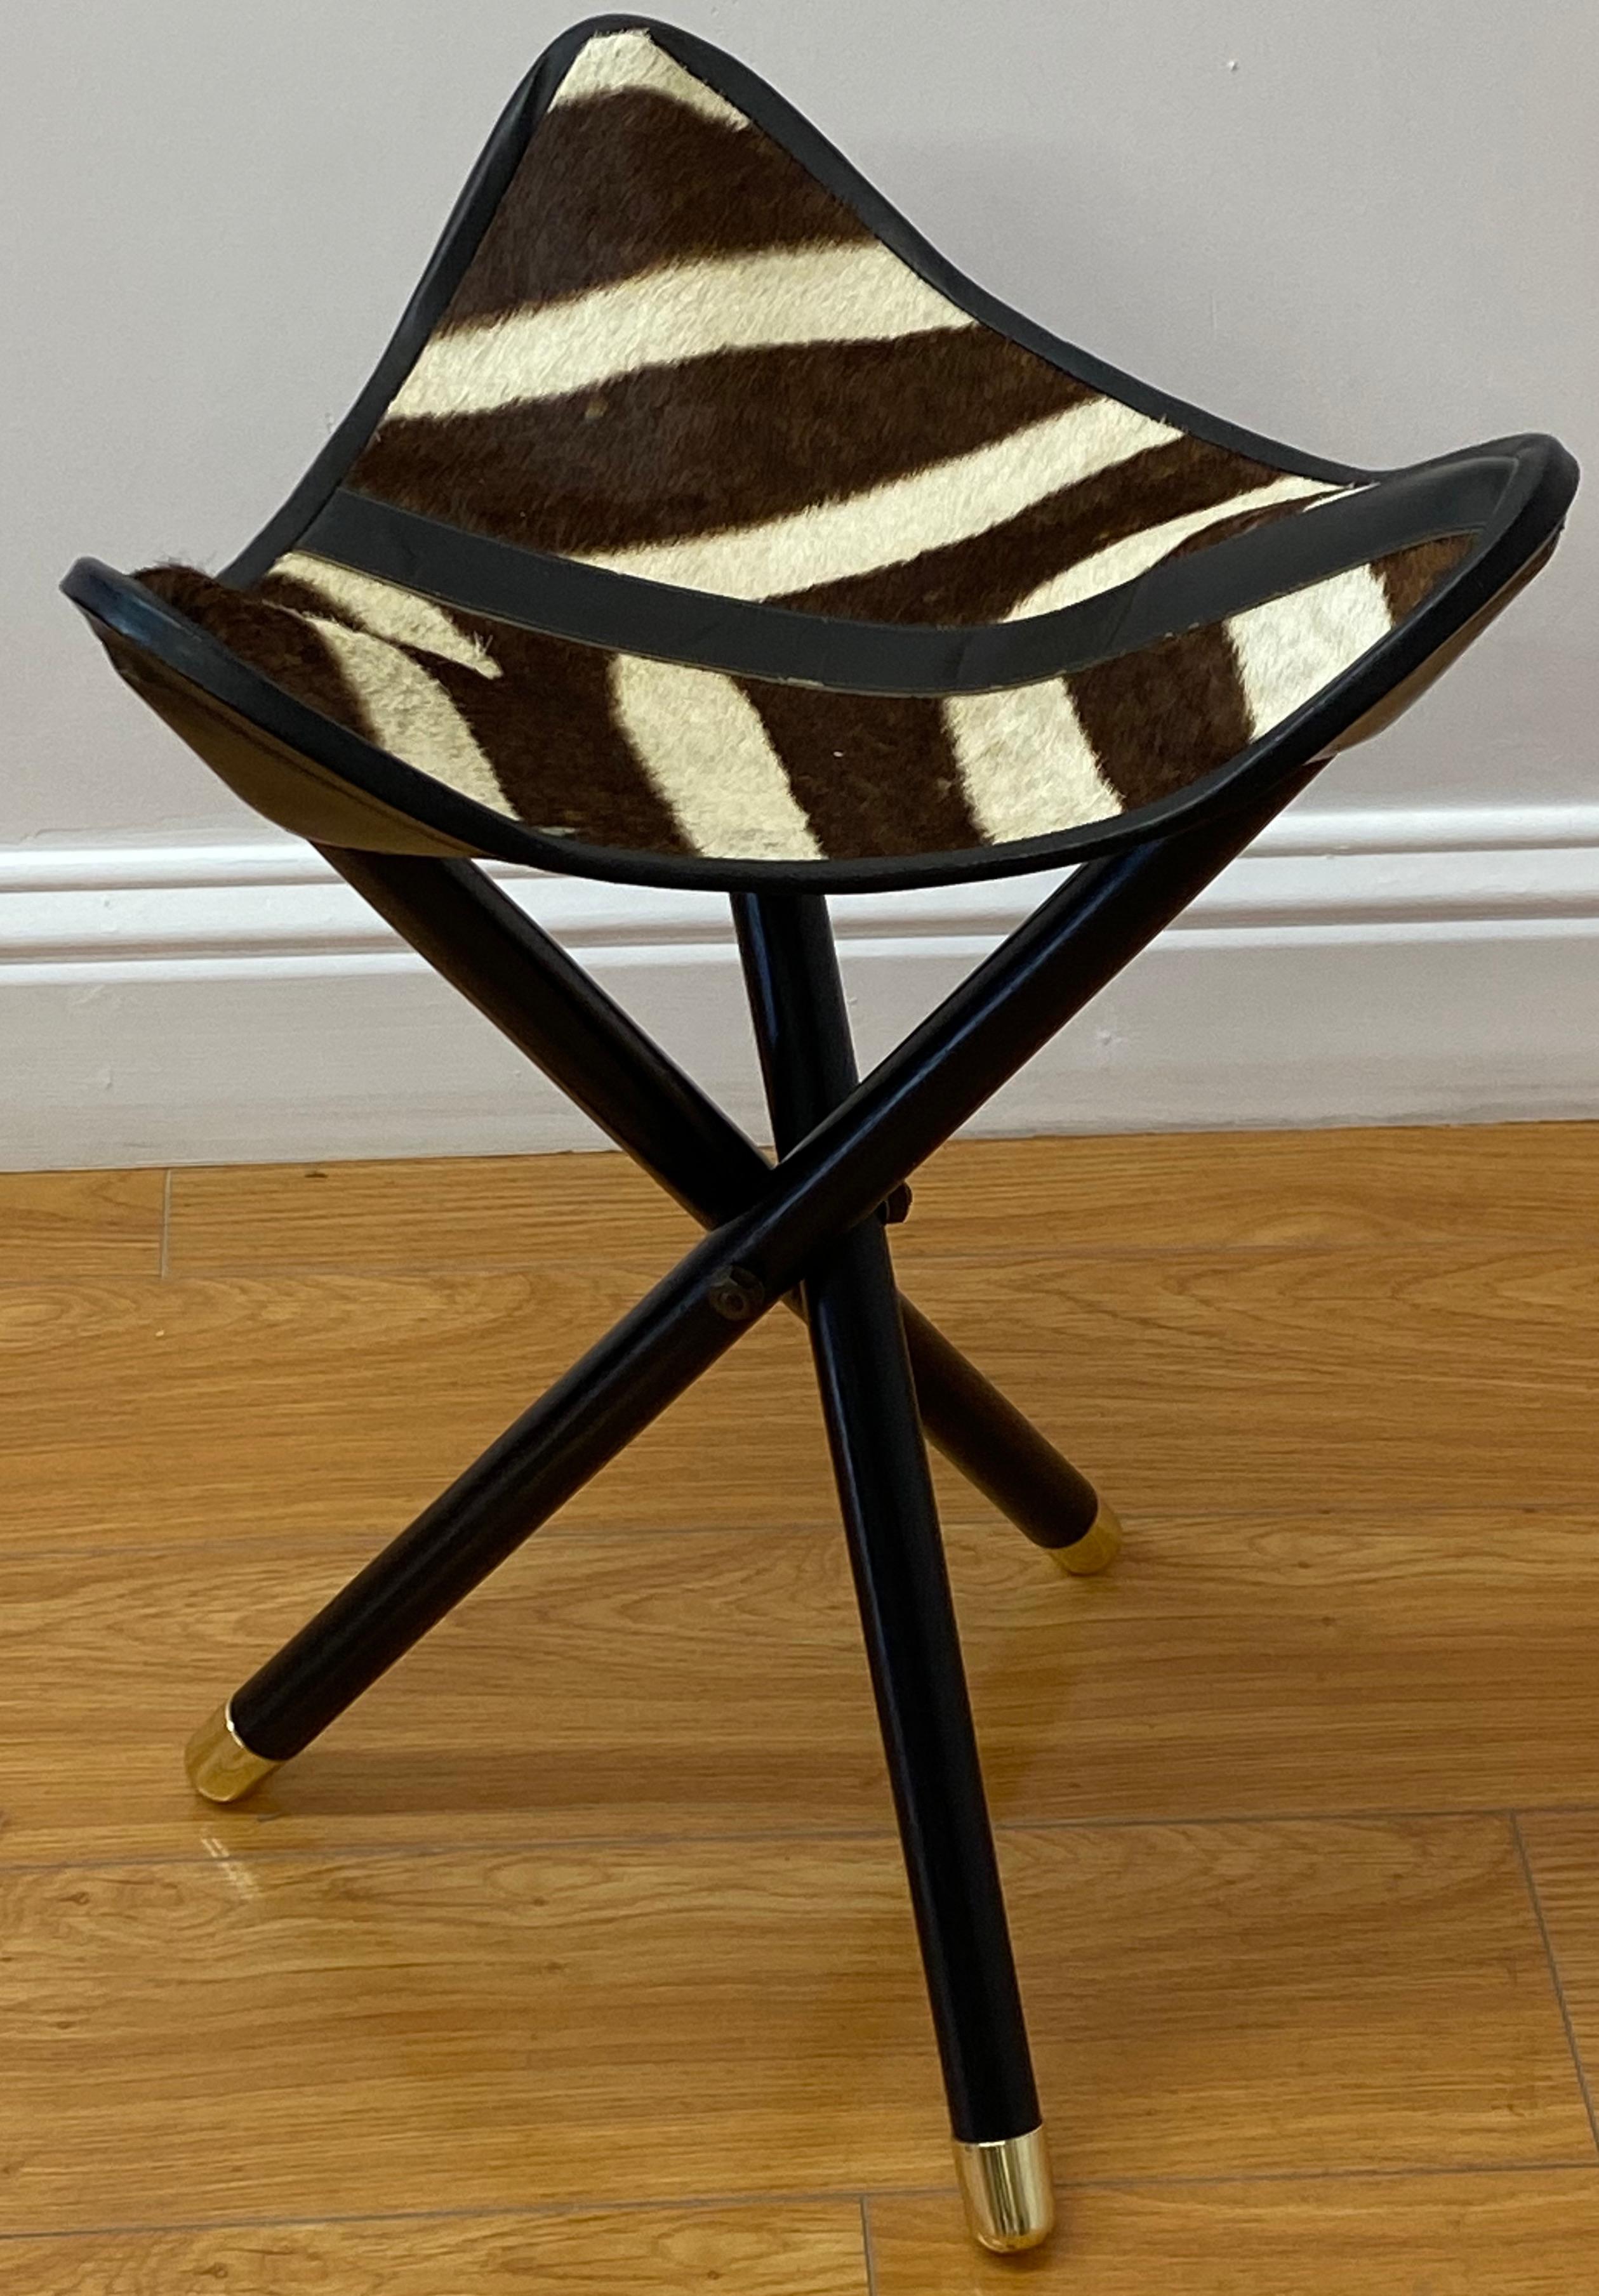 Folding campaign hunting seat with genuine zebra hide C.1970

The zebra hide and leather seat attaches to lacquered folding base

The seat measures 14